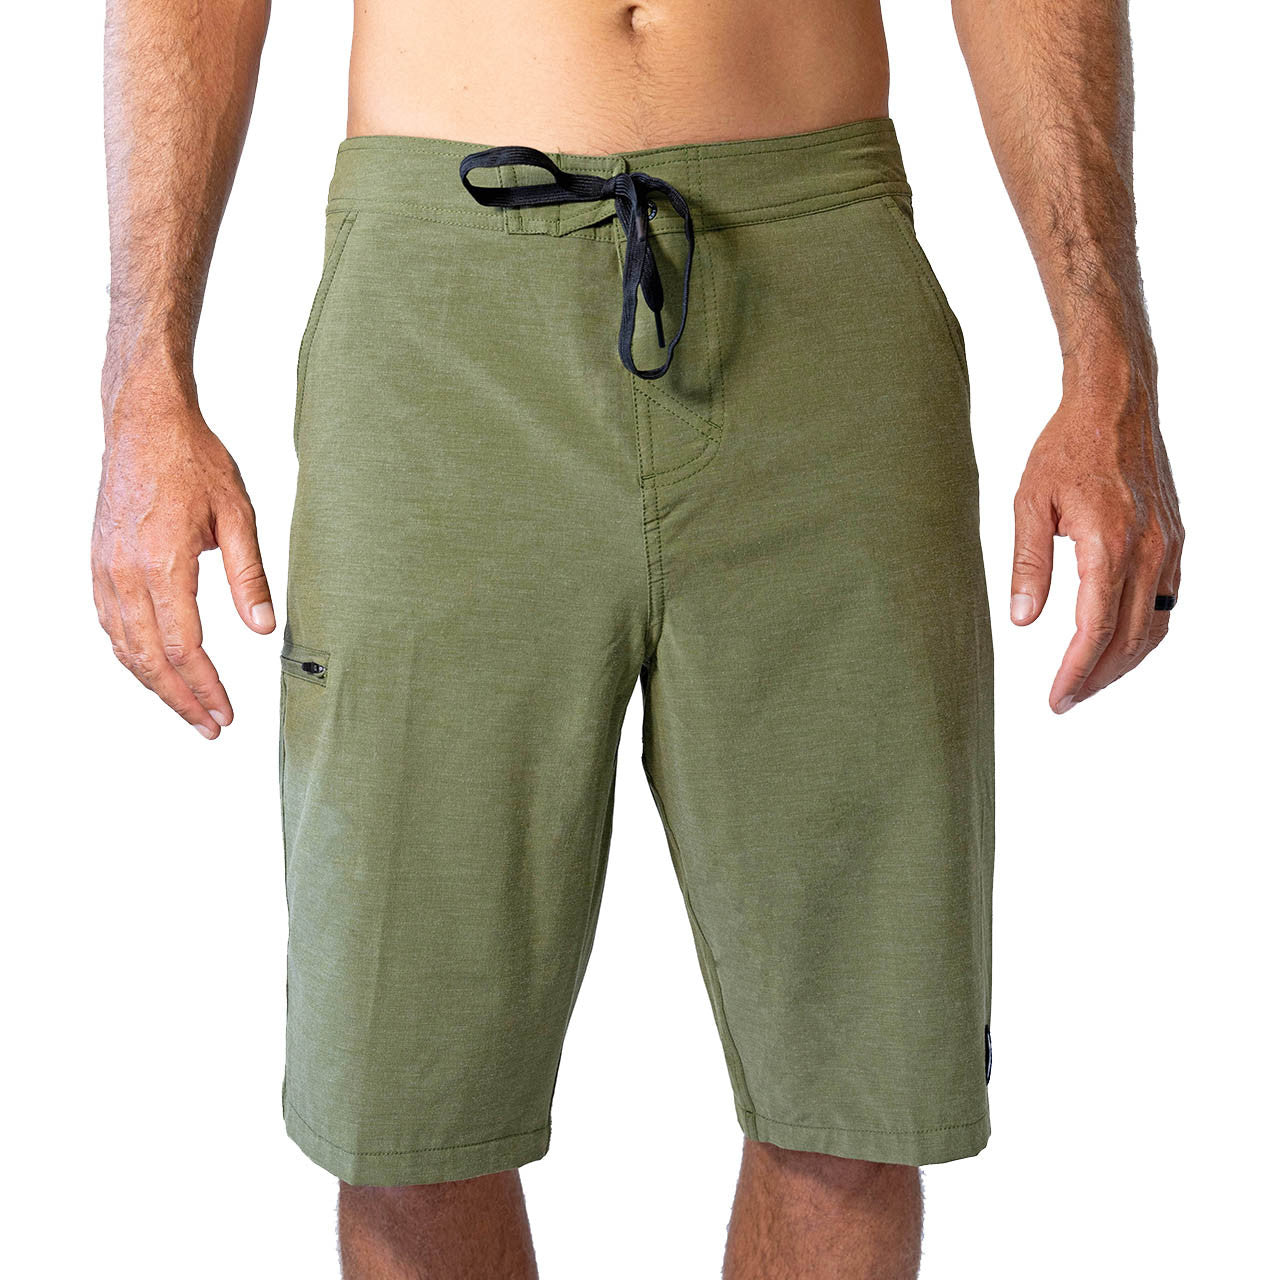 Buy Maui Rippers Very Long 4 Way Stretch Boardshorts 24 Inch Outseam online